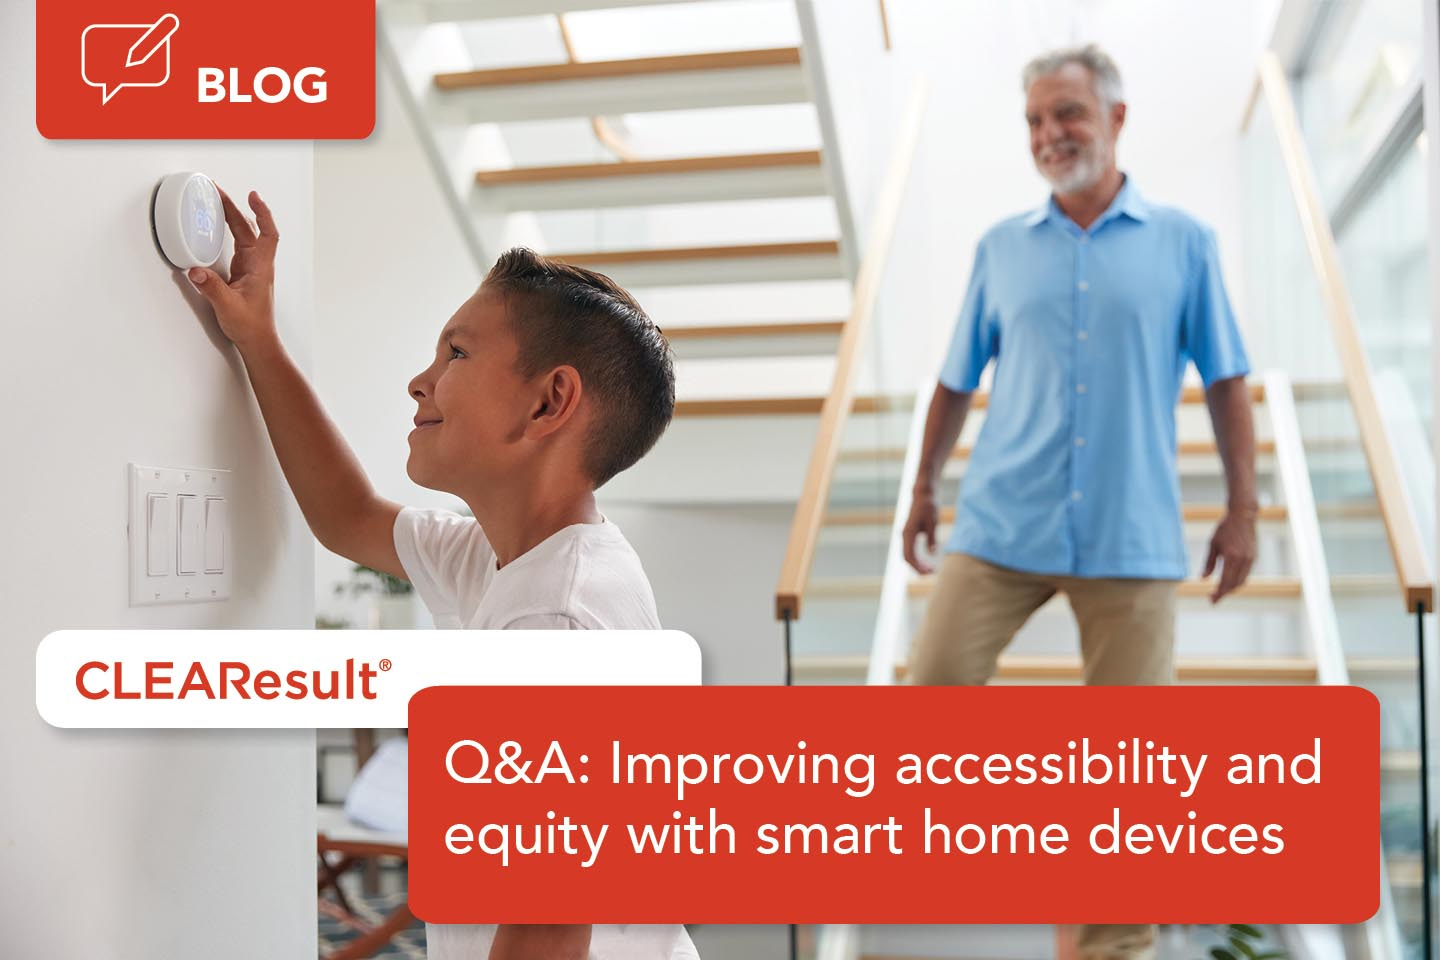 Improve accessibility and equity with smart devices: Q&A with Emily Kemper